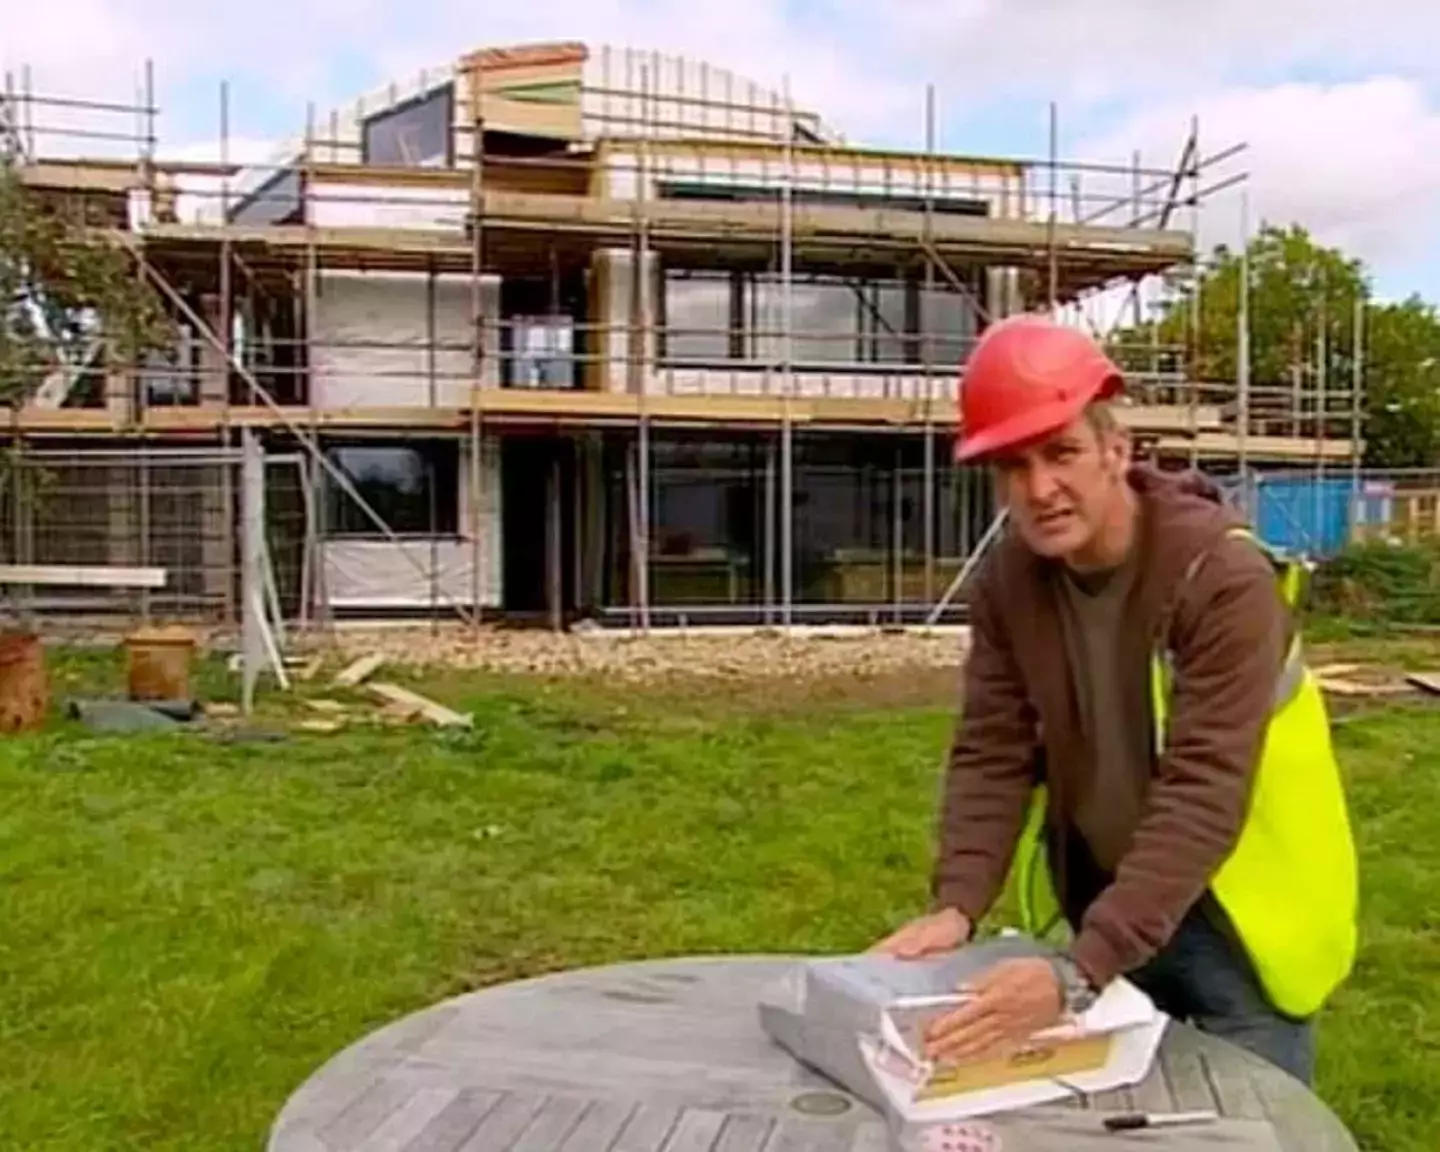 Grand Designs presenter Kevin McCloud heard the structure collapse from behind him. Channel 4